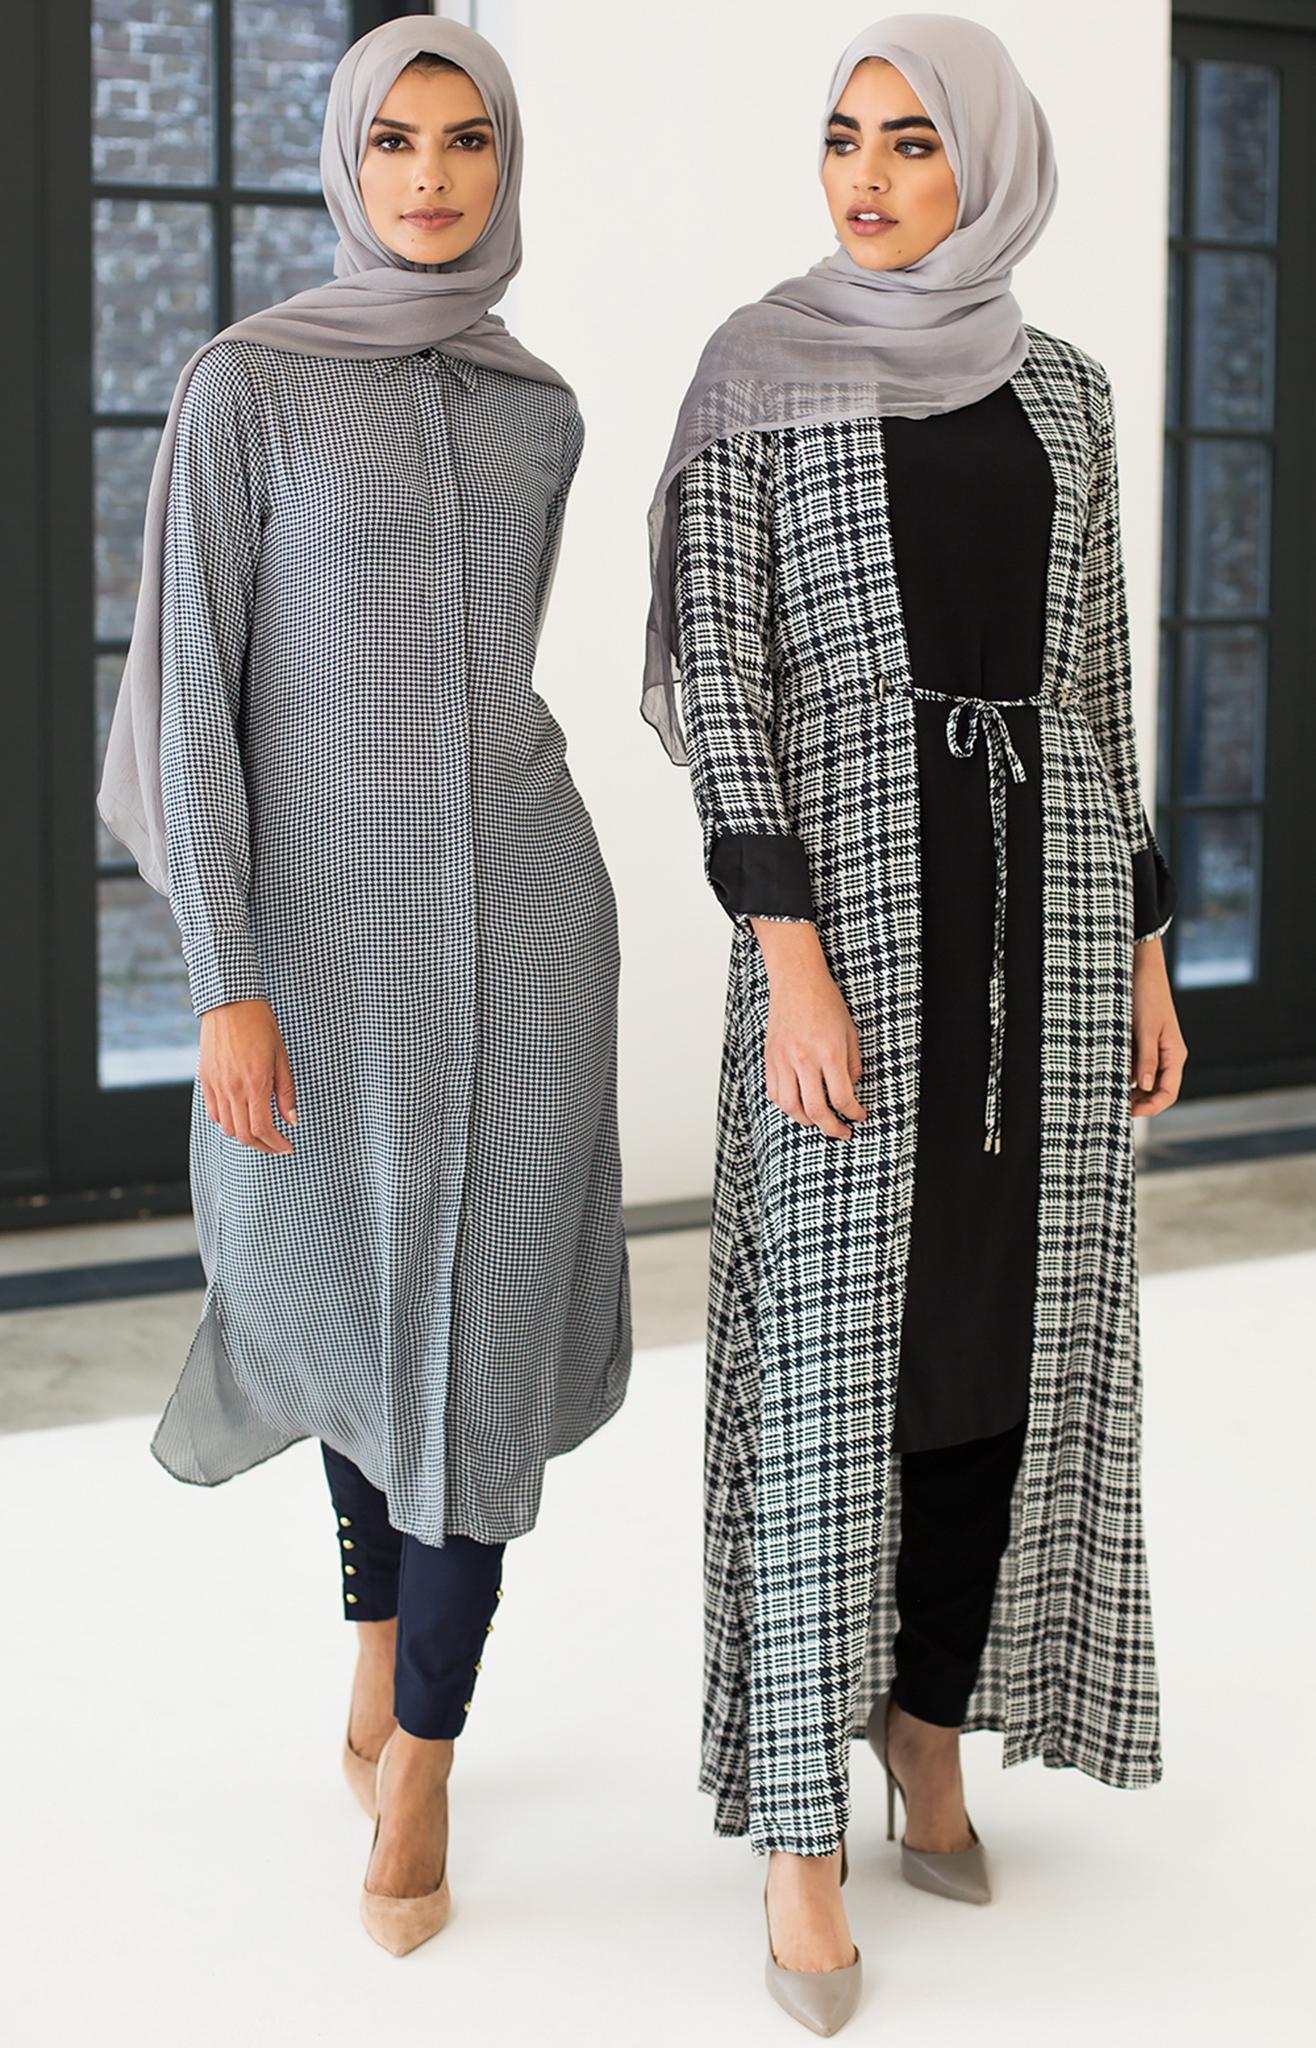 The houndstooth drawcord kimono and houndstooth shirt dress by Aab